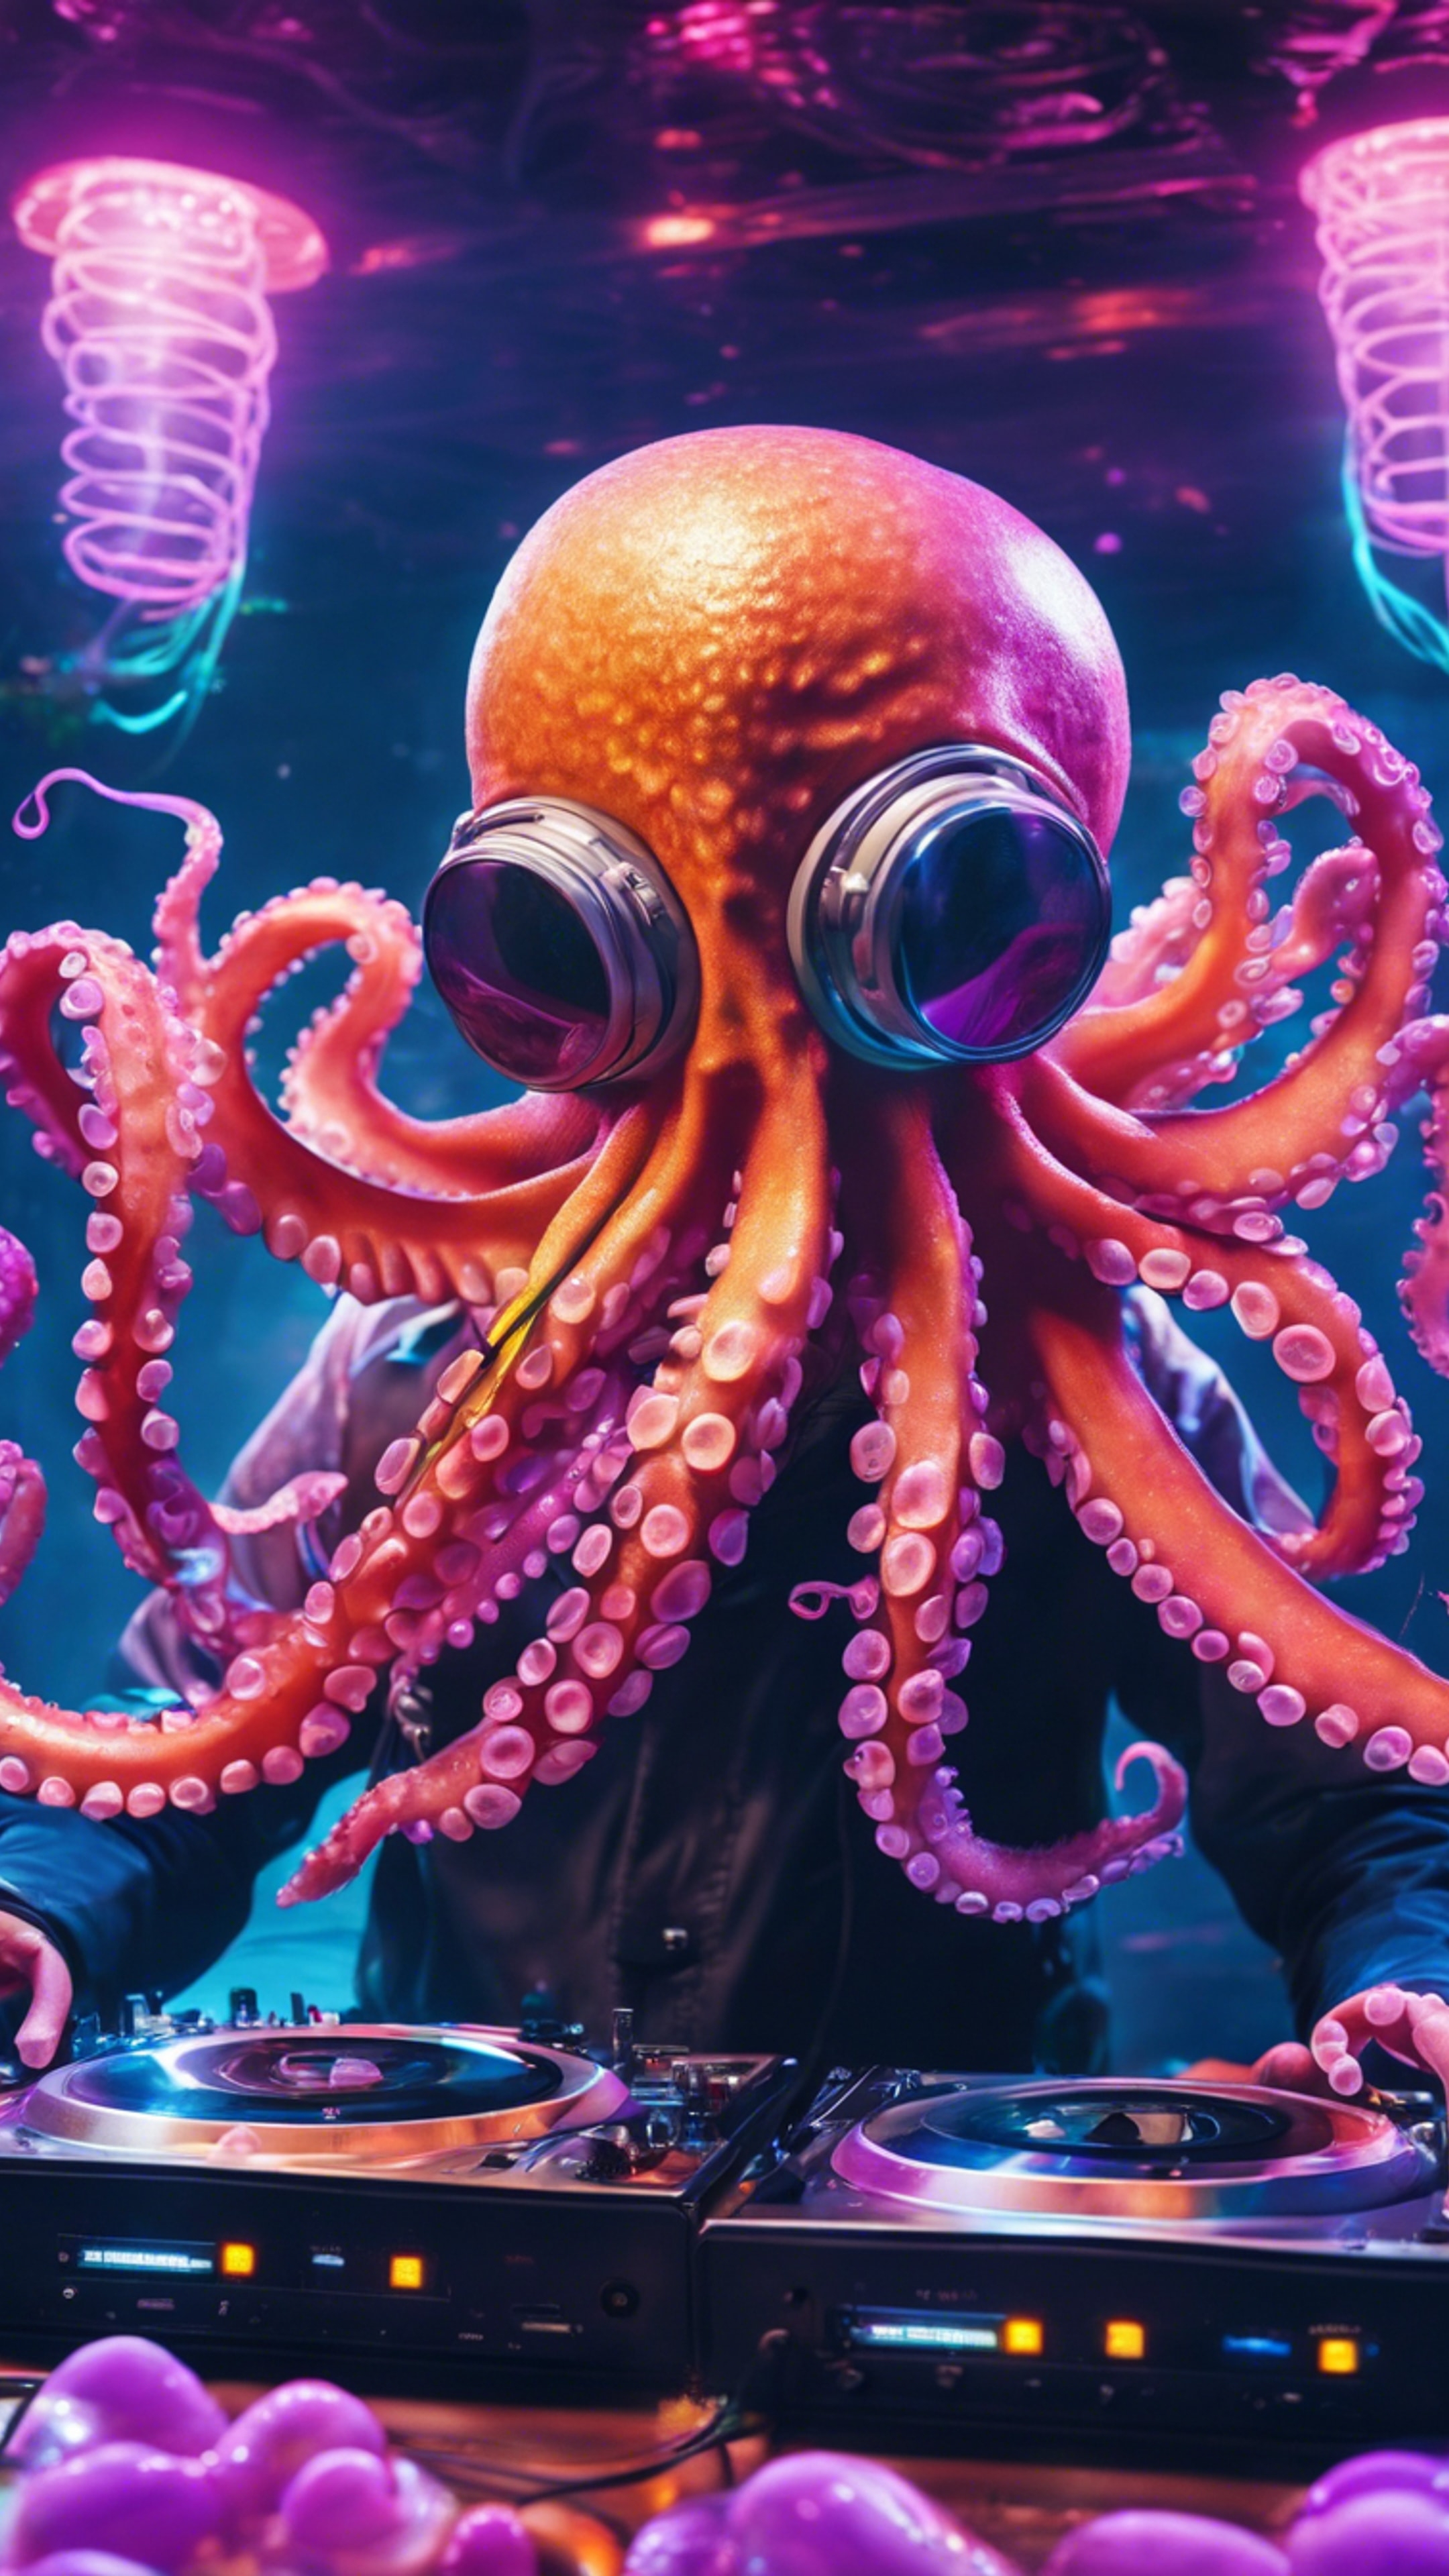 An octopus DJ controlling the music at an underwater rave amidst neon jellyfish. Валлпапер[8d0f478d59094f5192d2]